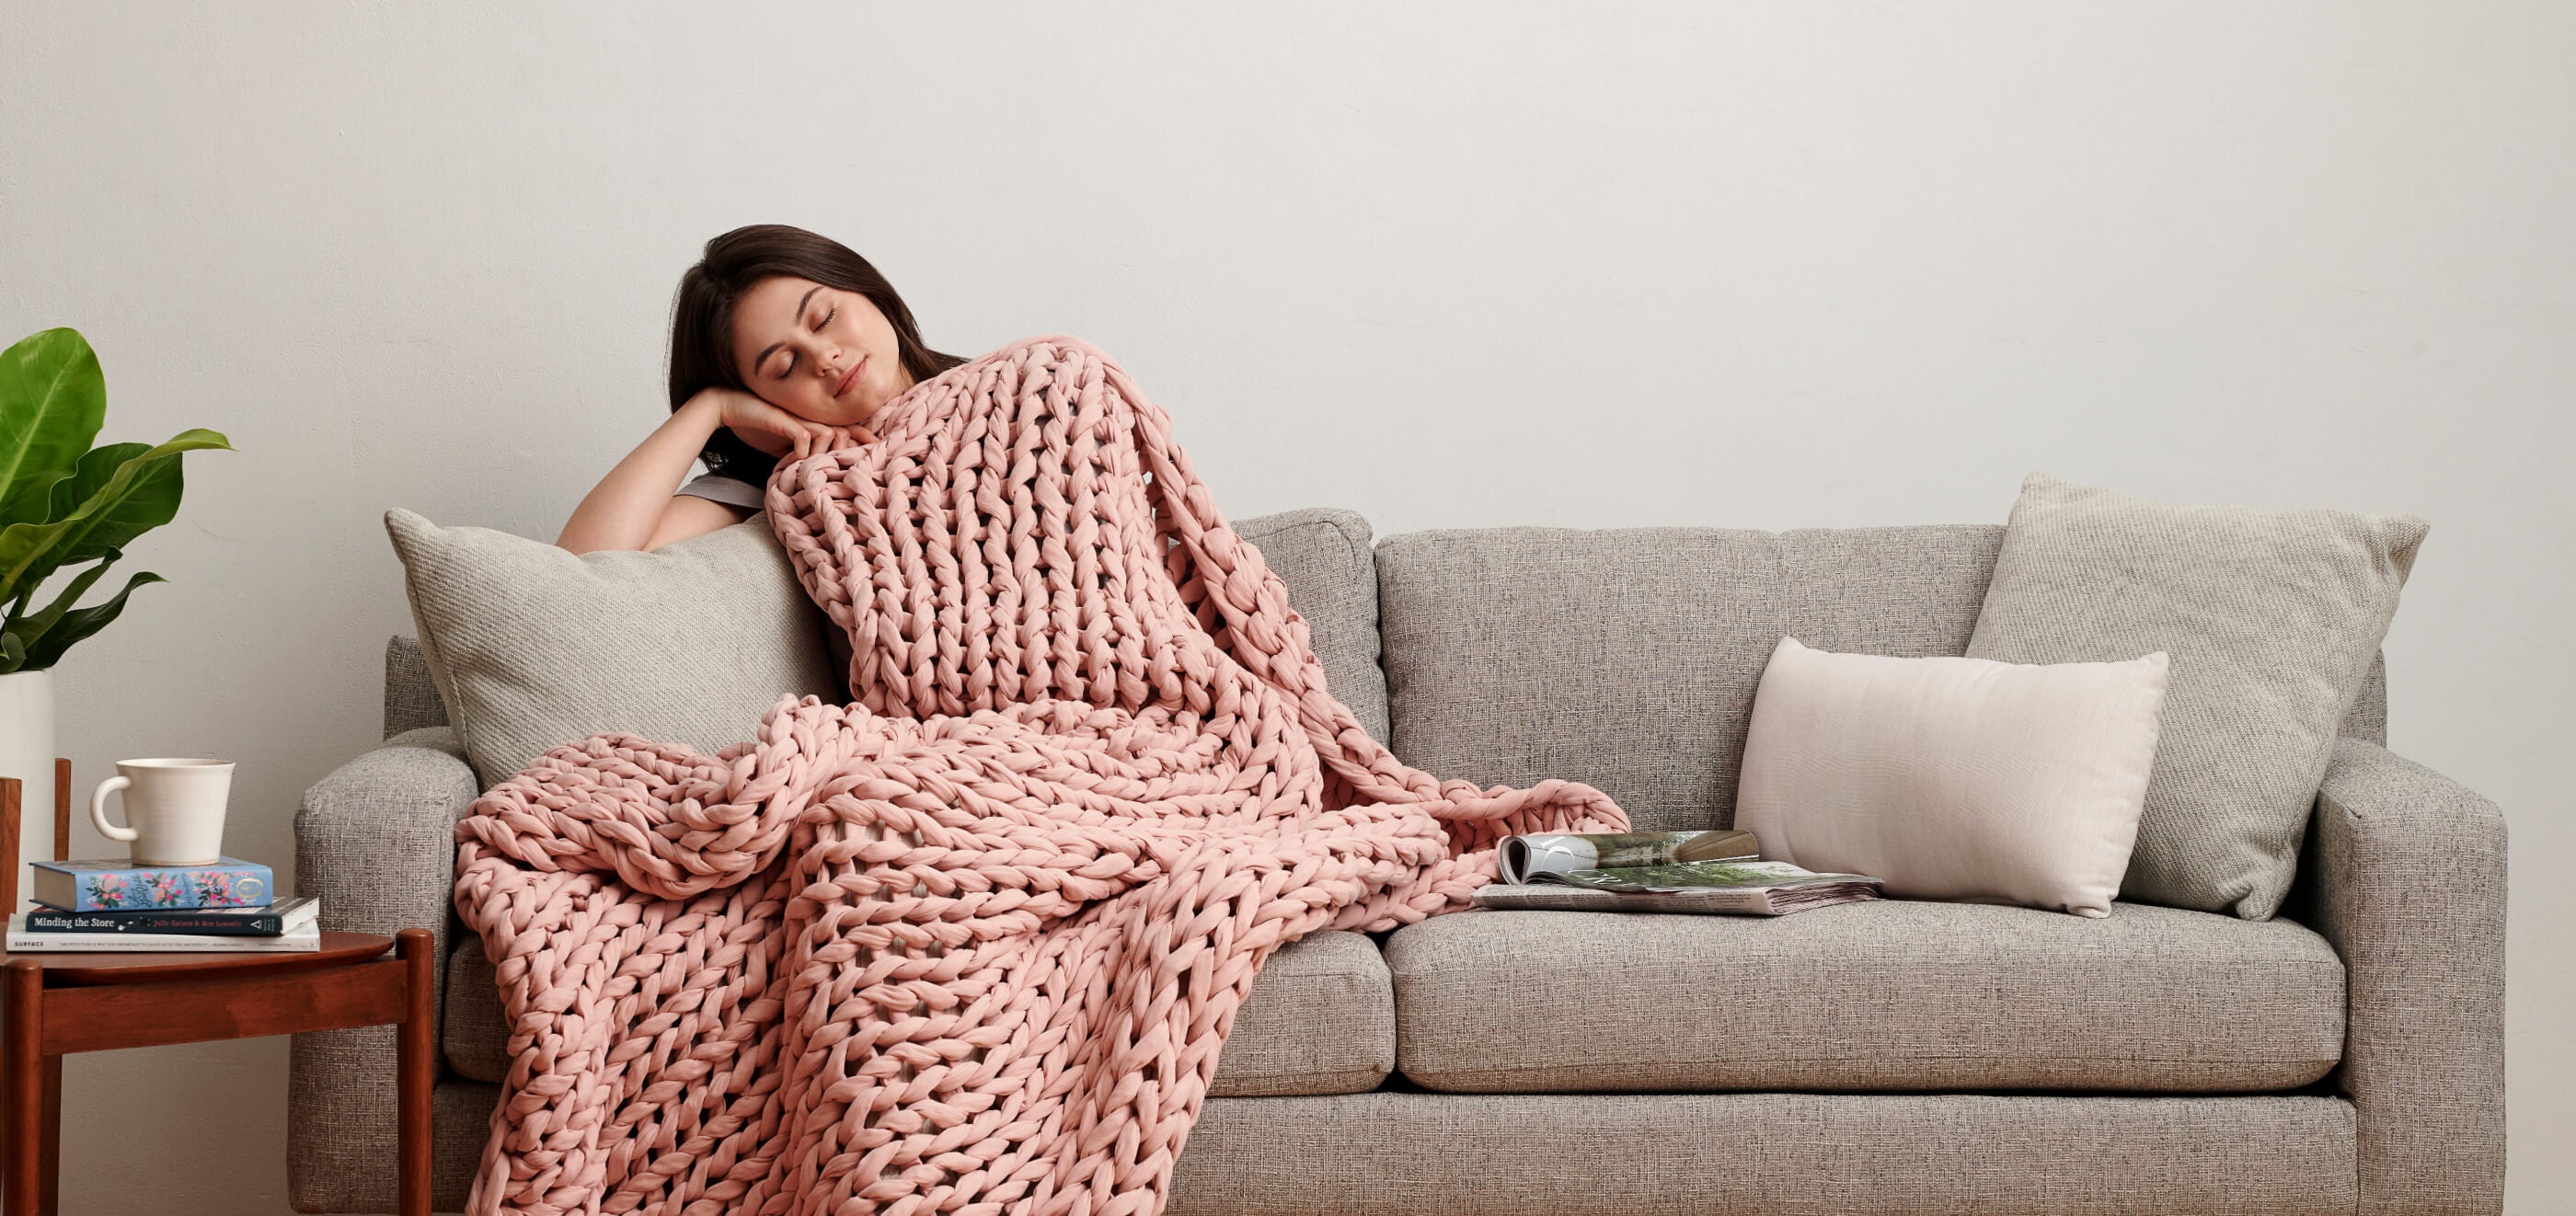 Woman relaxing under a weighted blanket